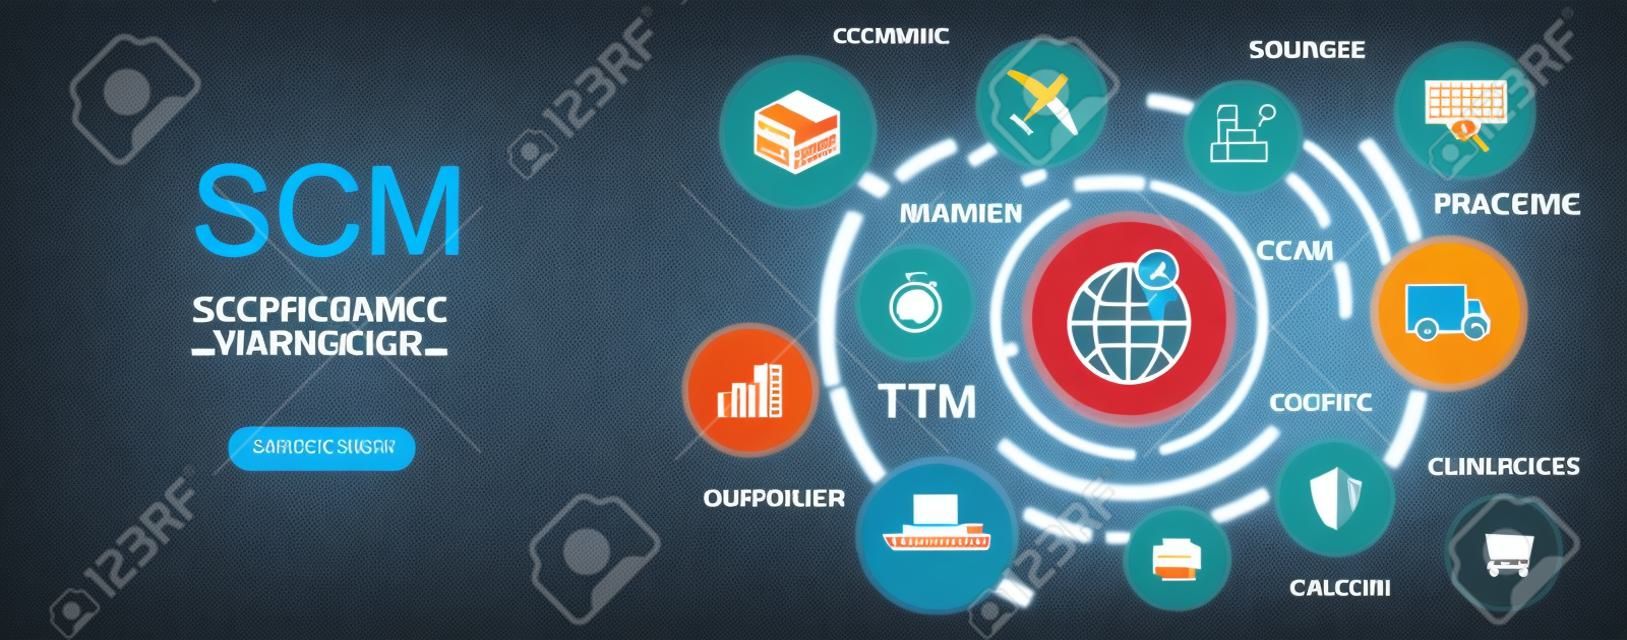 SCM Vector Banner. Supply Chain Management, Aspects of Modern Company Logistics Processes. Business Challenges Design. SCM - Supply Chain Management Banner with Keywords and Icons.